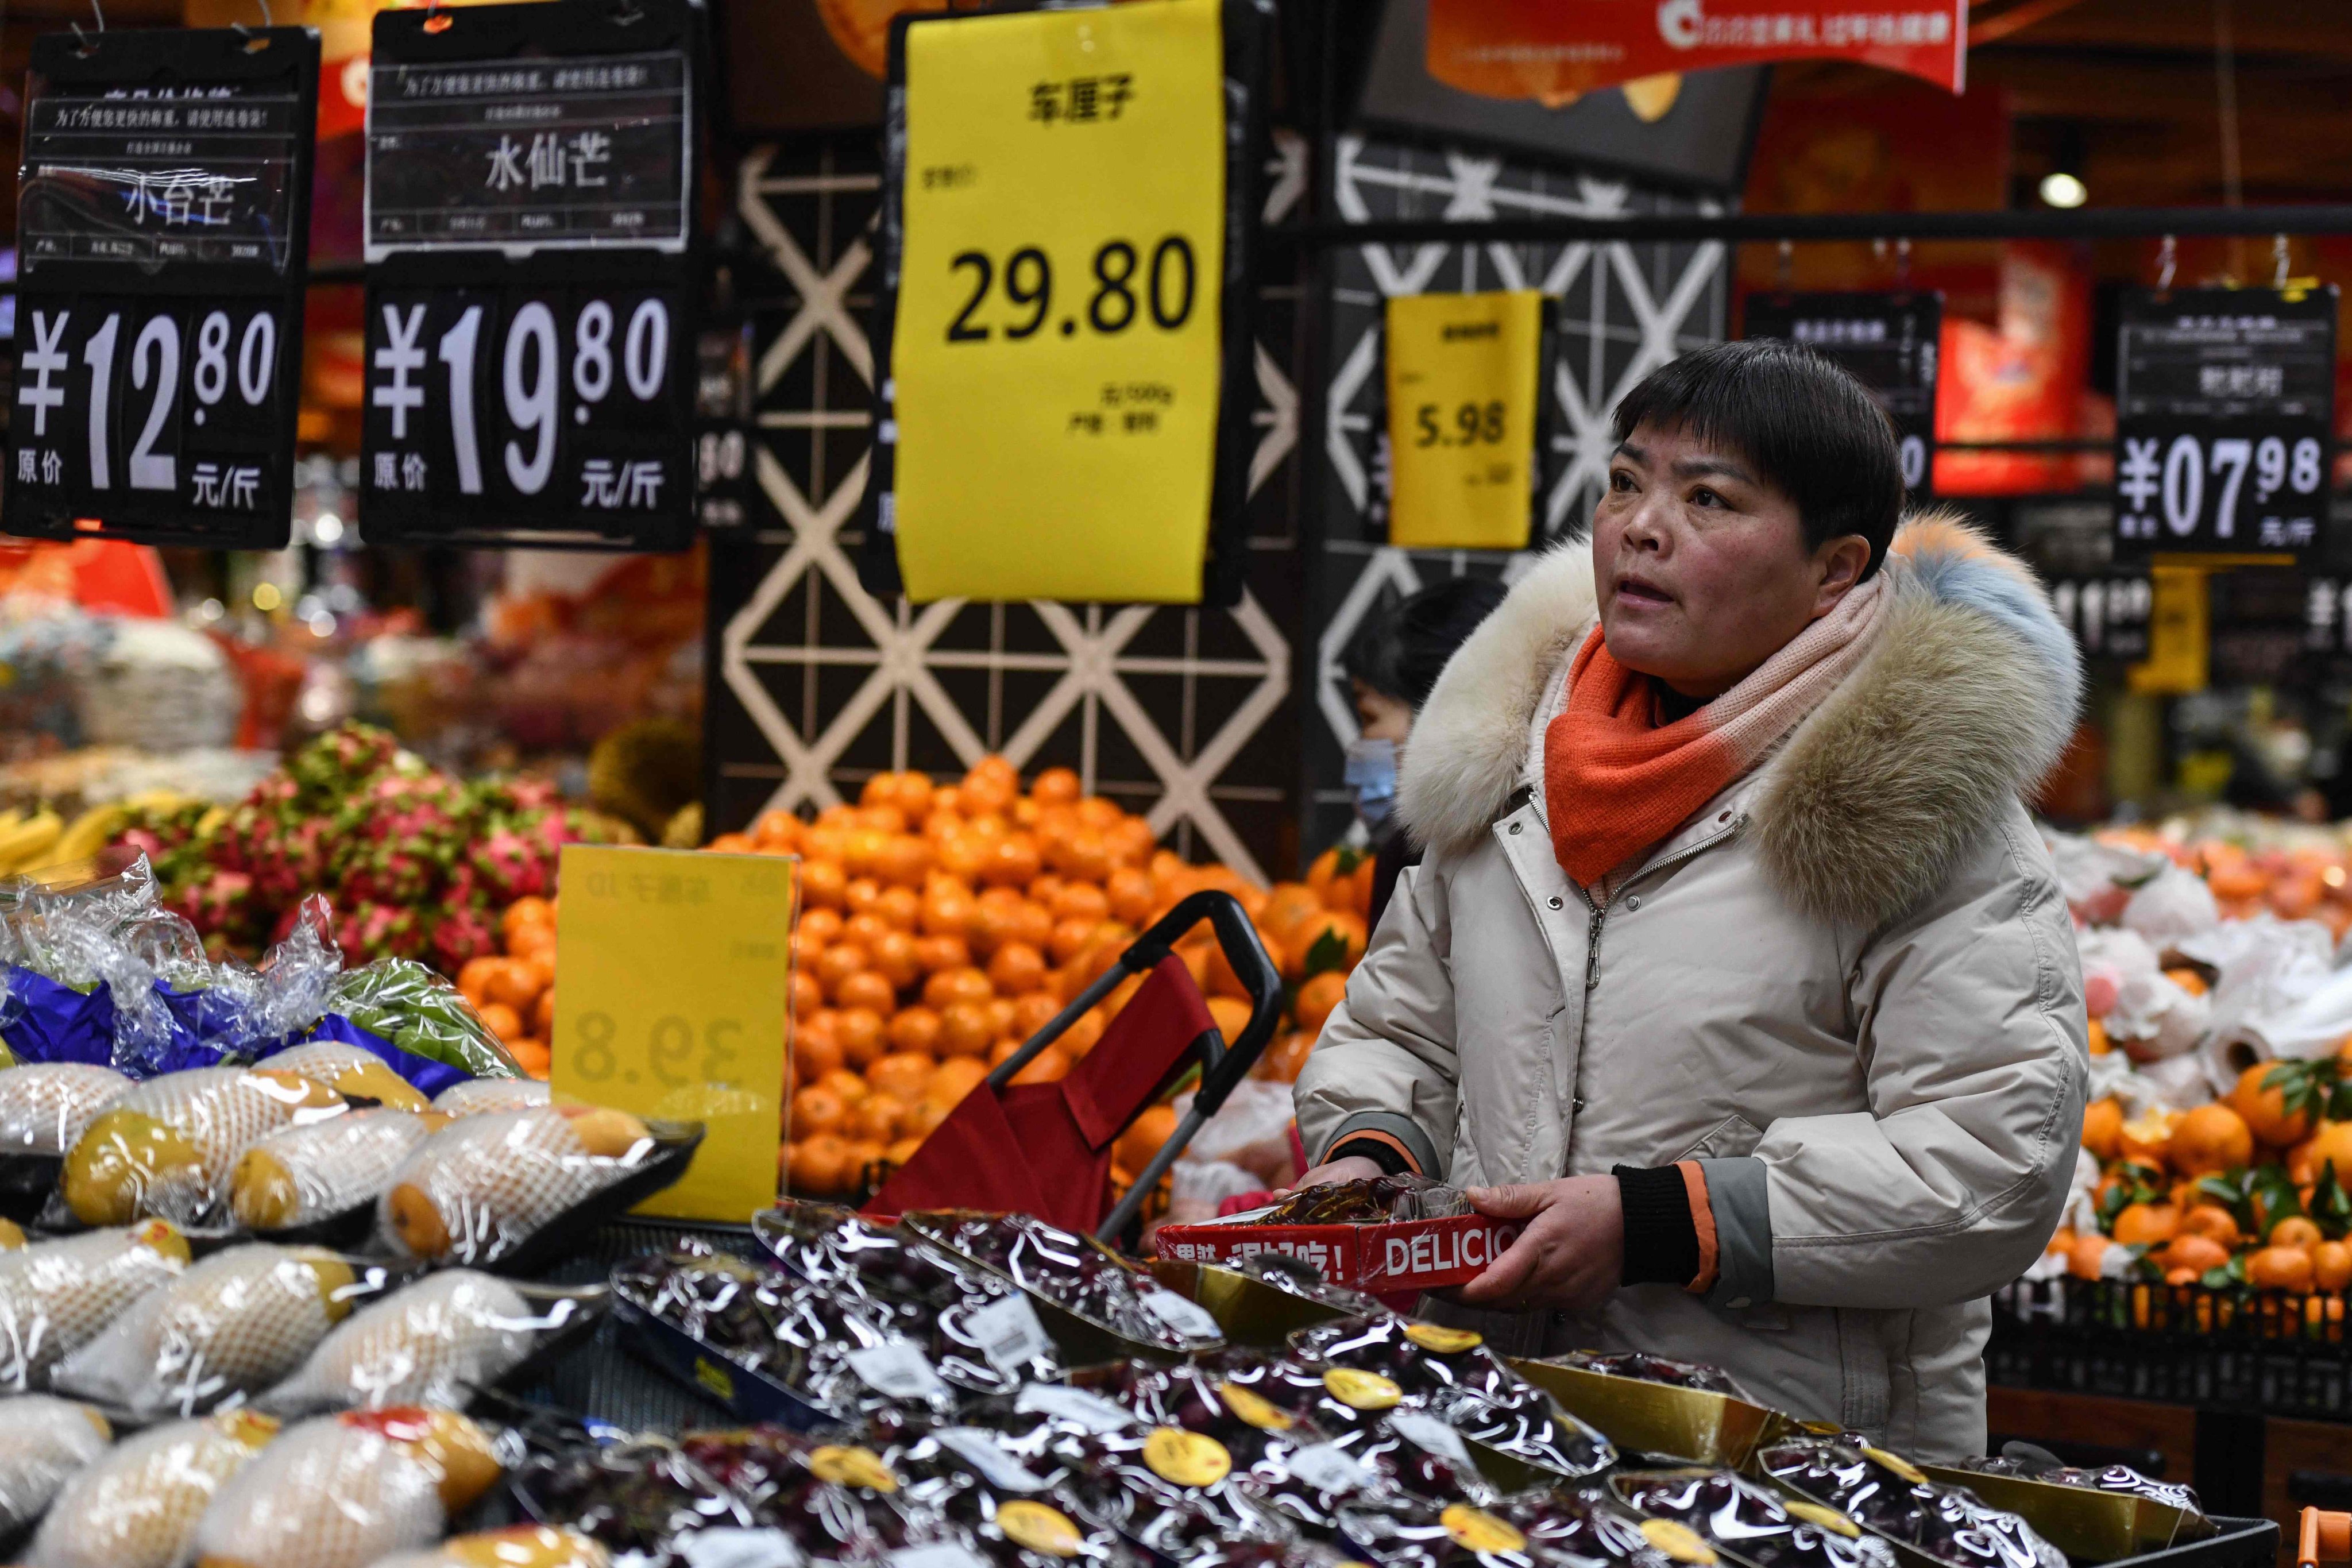 The Lunar New Year tends to be accompanied by greater spending and rising prices, which analysts say contributed to February’s CPI rebound. Photo: AFP